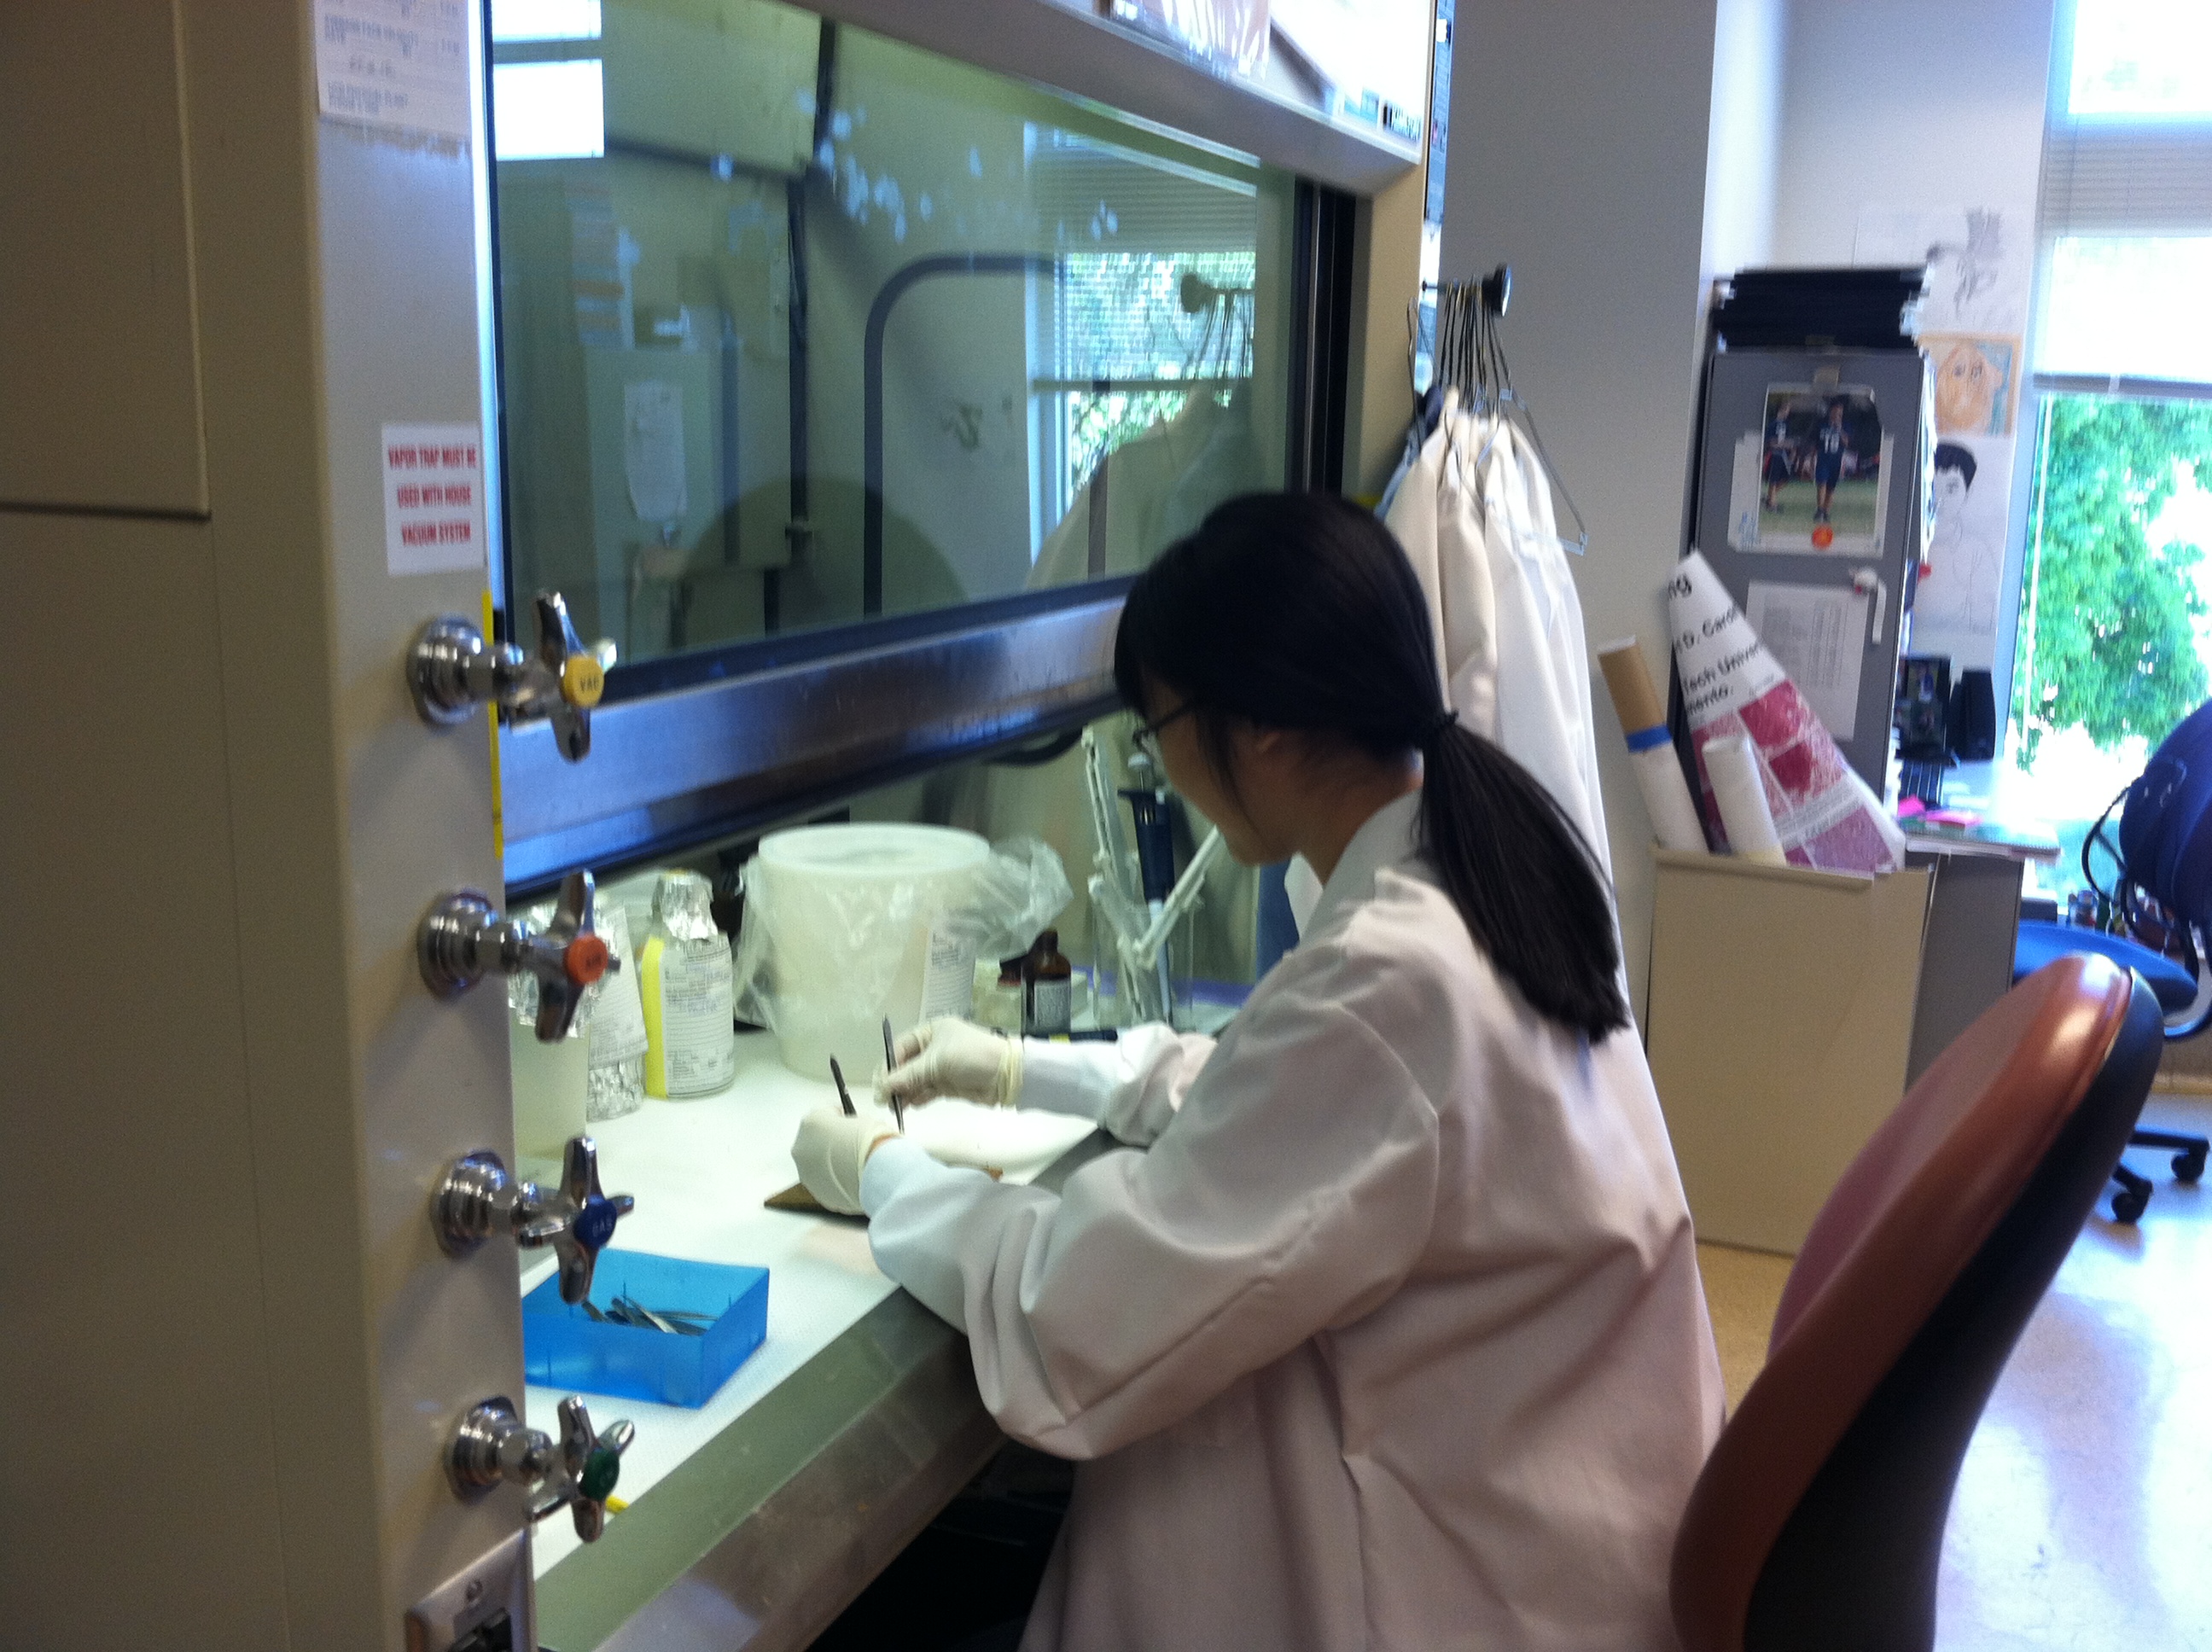 Biotech internships offer valuable lab experience The HUB